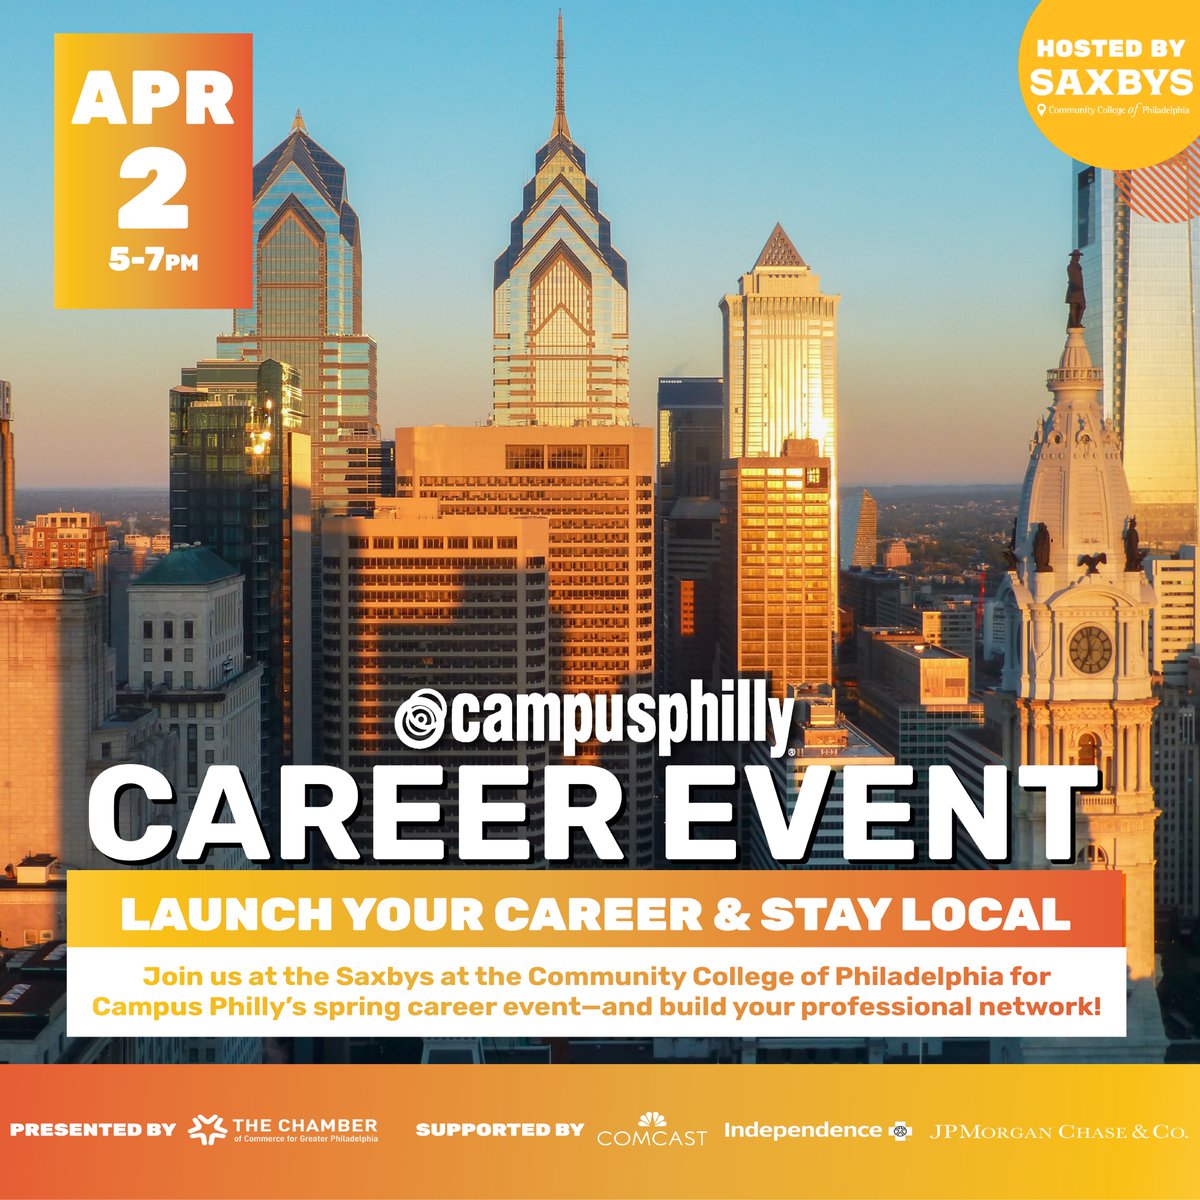 We are less than 3 weeks away from #CampusPhilly's spring career event, happening on 4/2 at @Saxbys on @CCPedu's campus! College students & recent grads are invited to network with 25+ Philly companies—plus win PRIZES. 🥳 View the full list + register: bit.ly/3P3qBvE